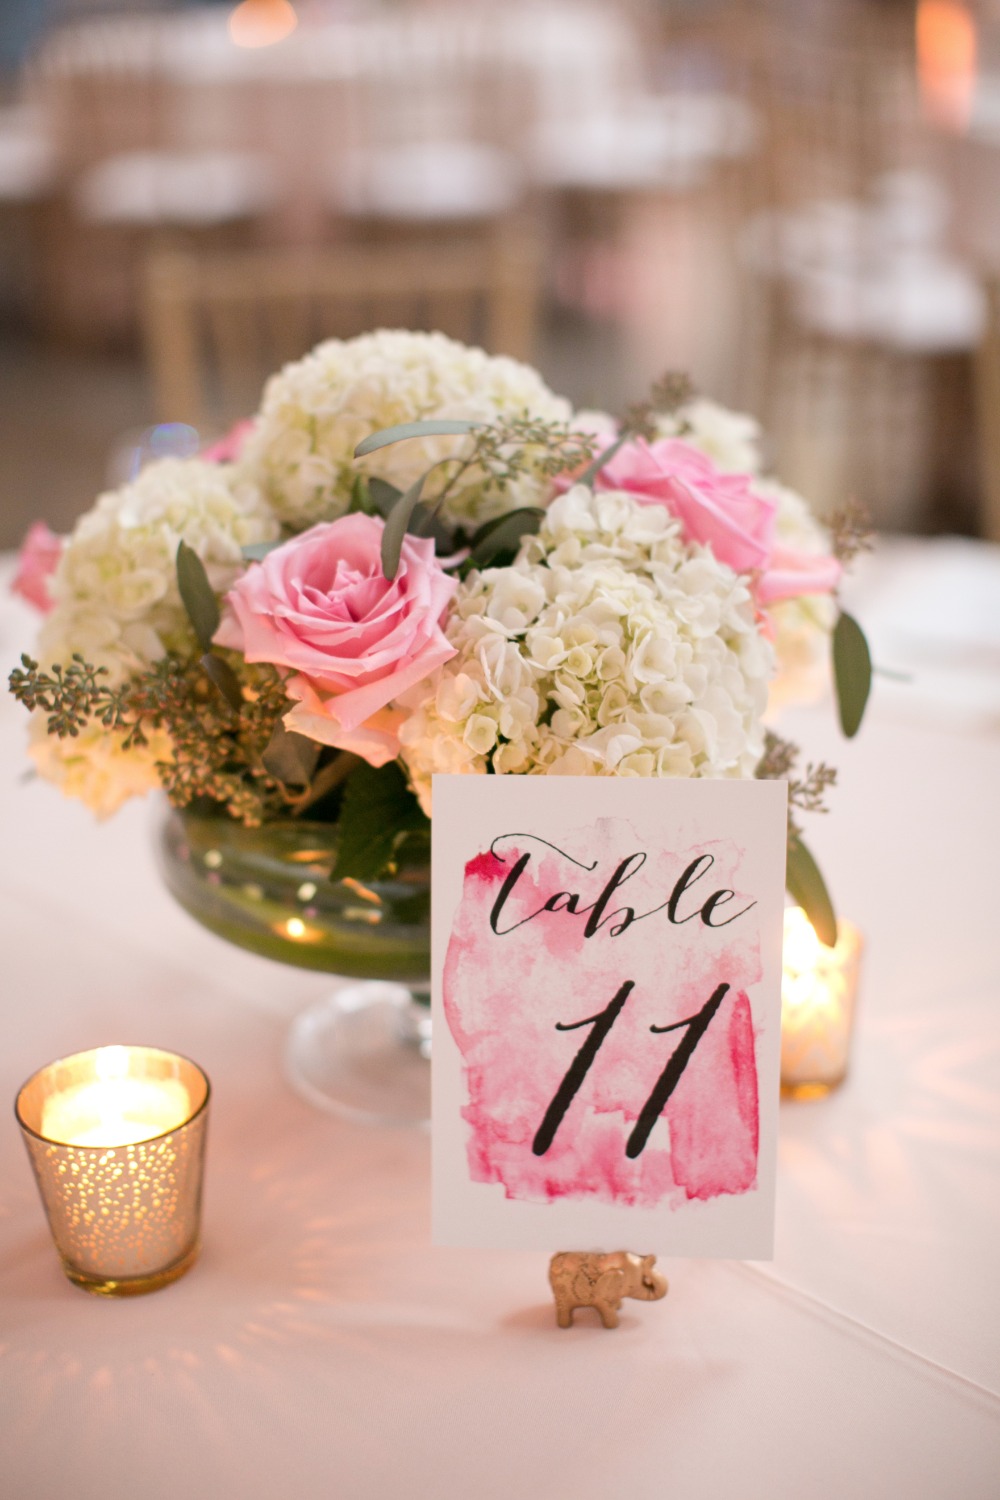 Water color table number